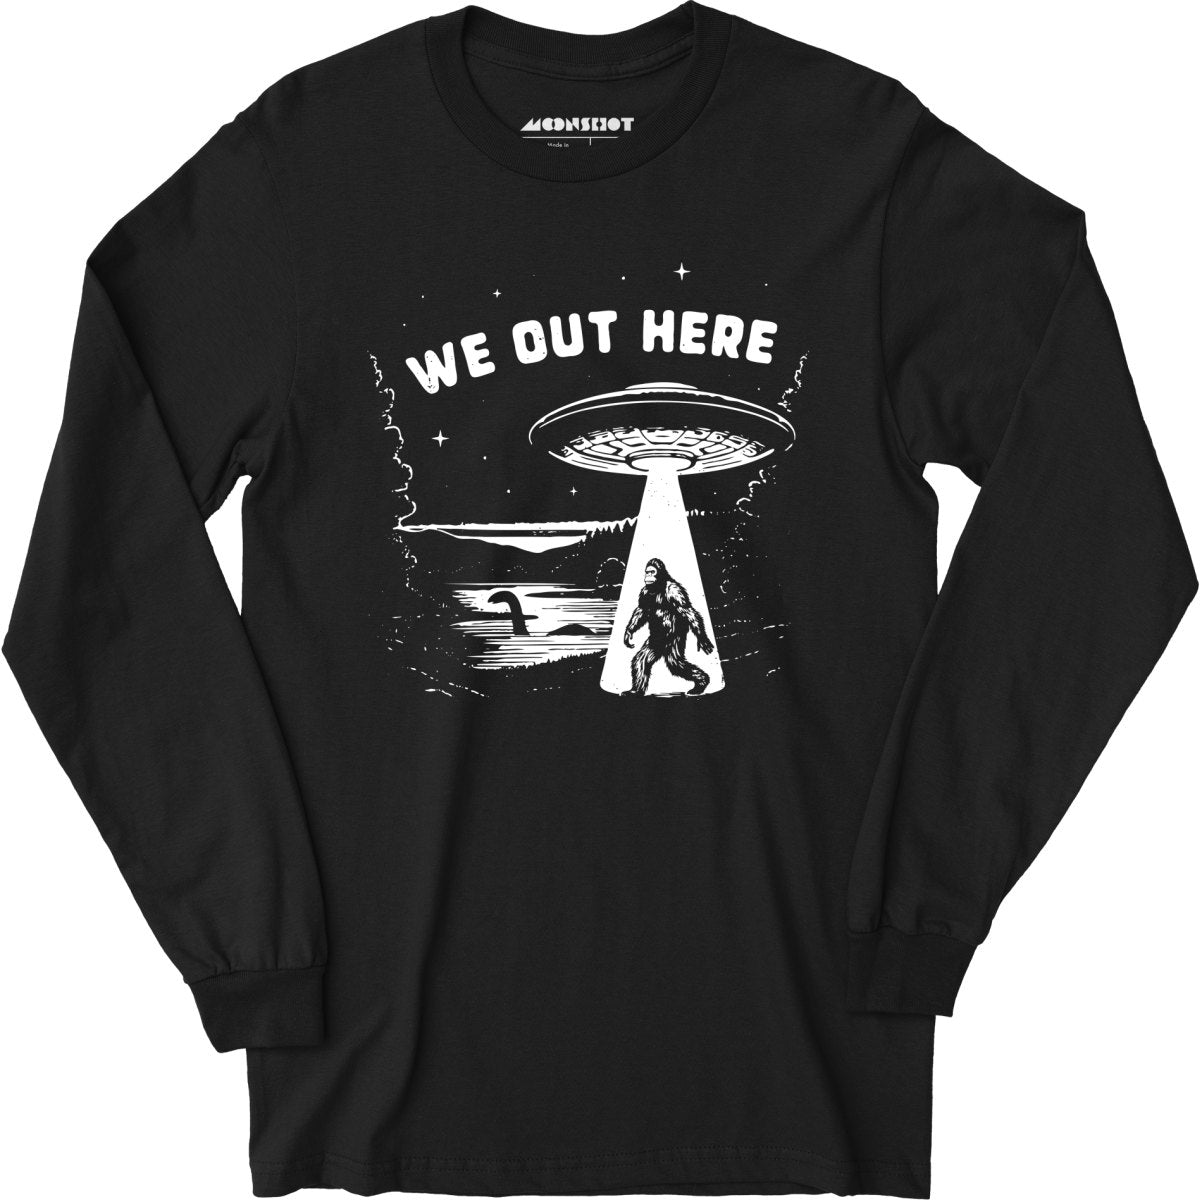 We Out Here - Long Sleeve T-Shirt